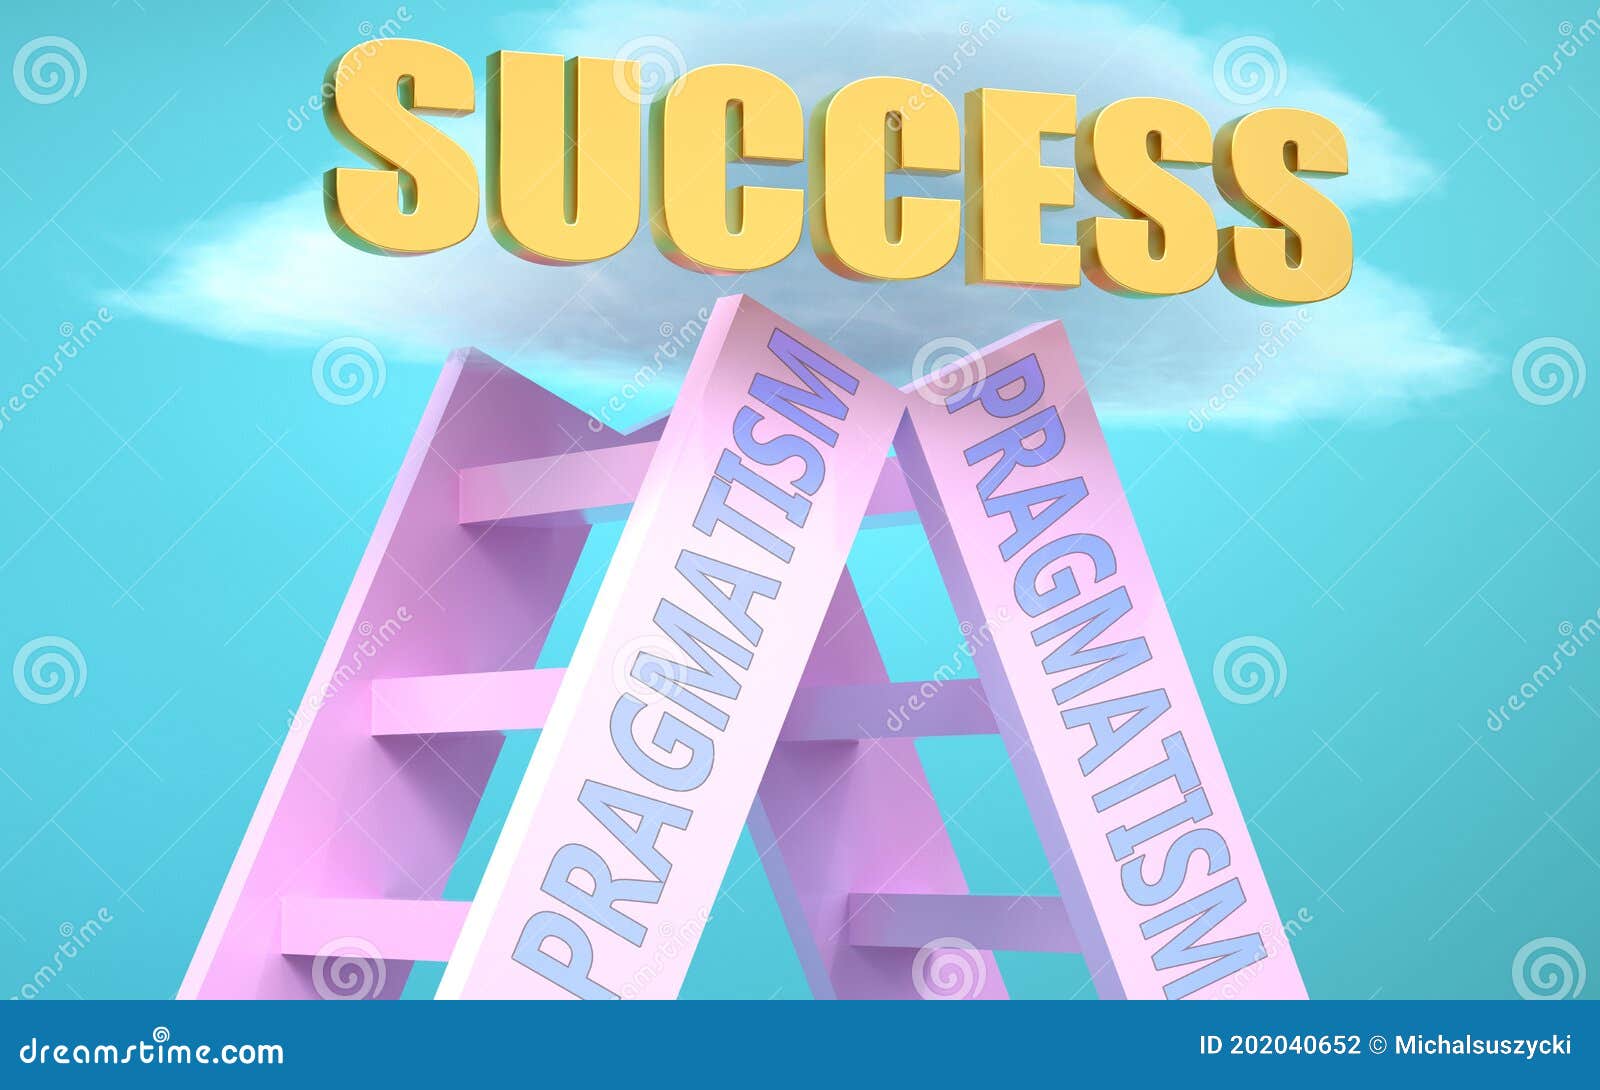 pragmatism ladder that leads to success high in the sky, to ize that pragmatism is a very important factor in reaching